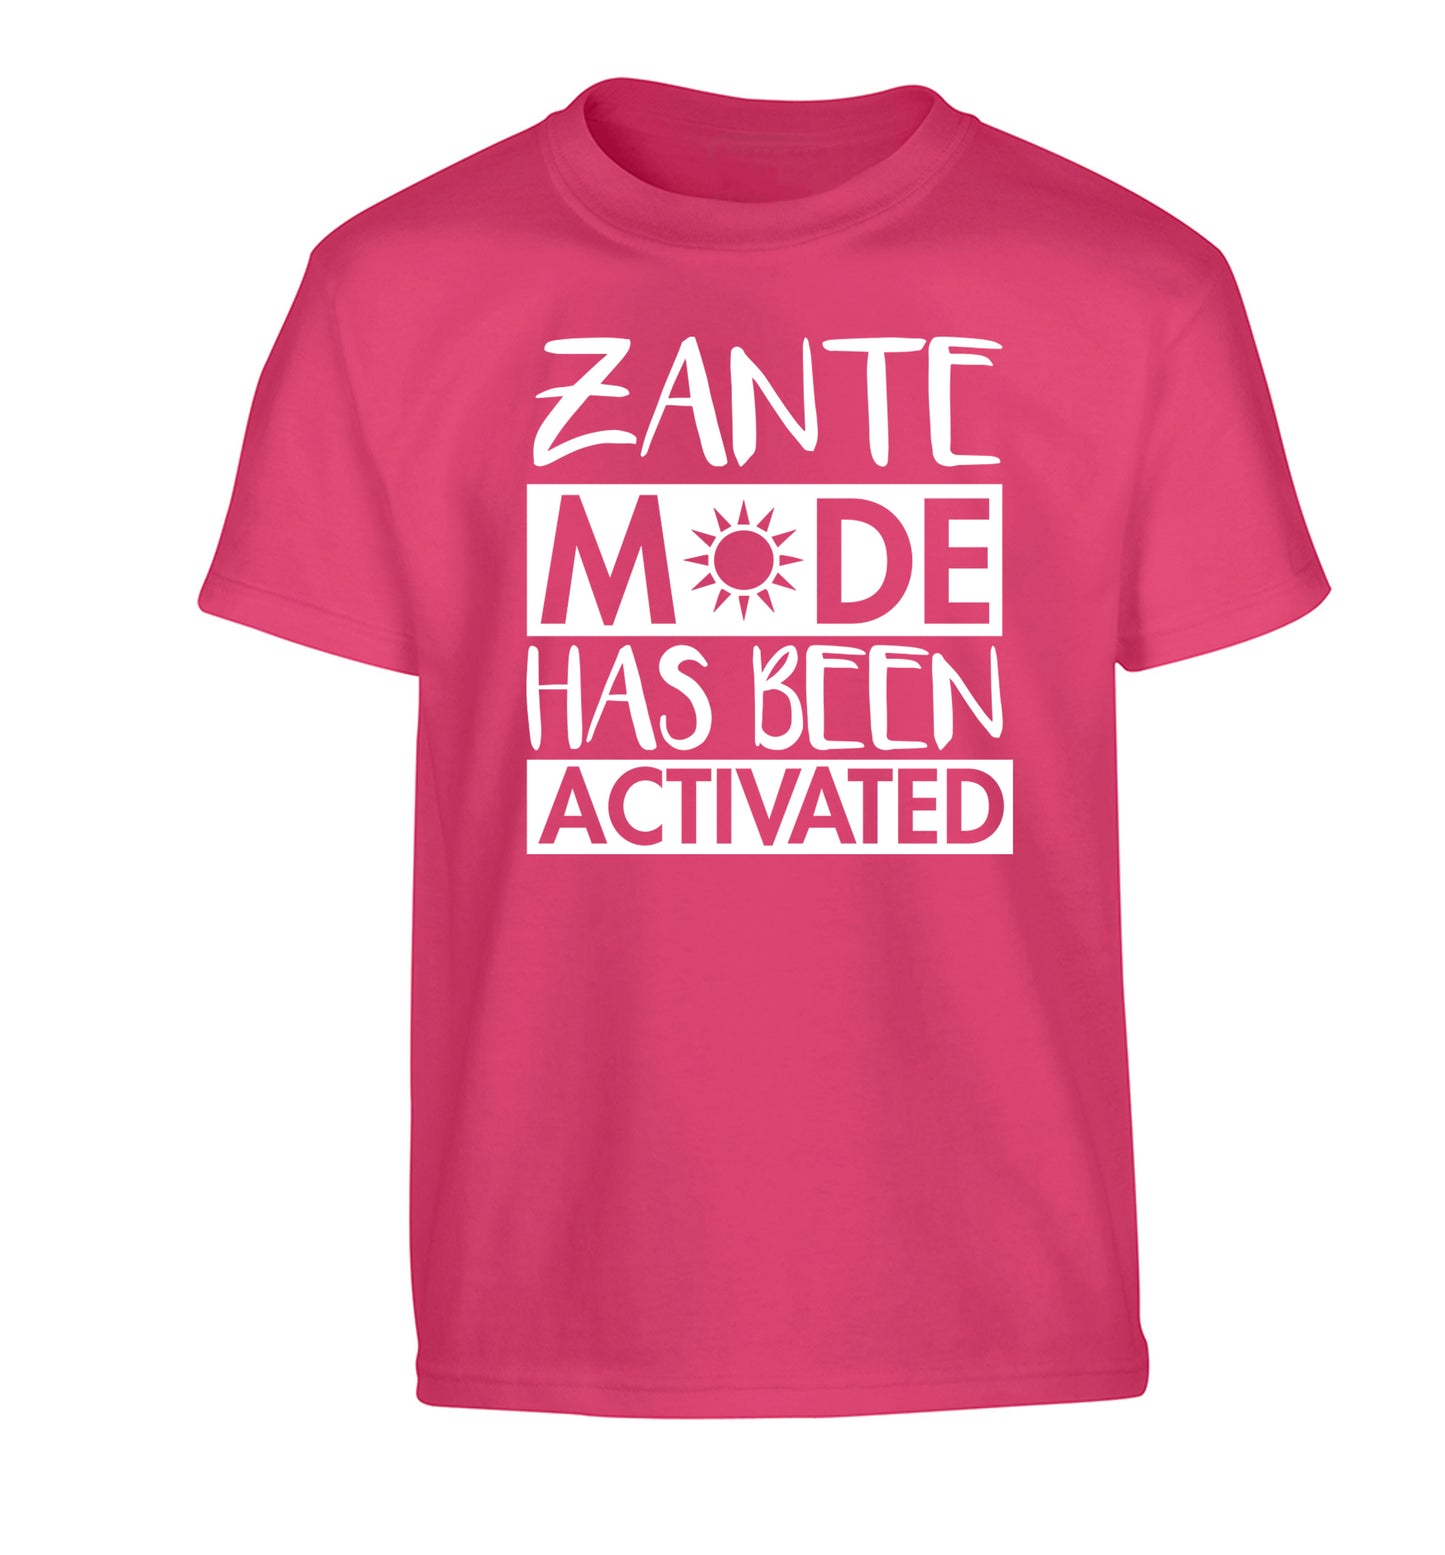 Zante mode has been activated Children's pink Tshirt 12-13 Years